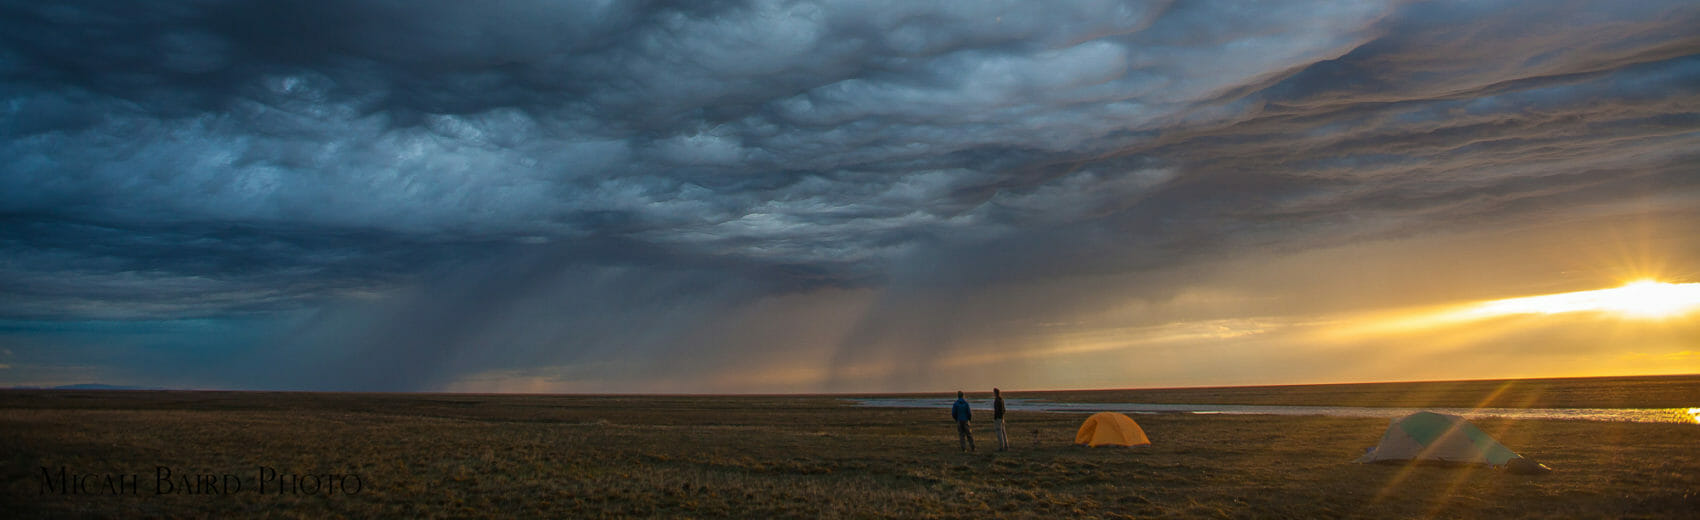 camping on the coastal plain of the arctic refuge with a storm